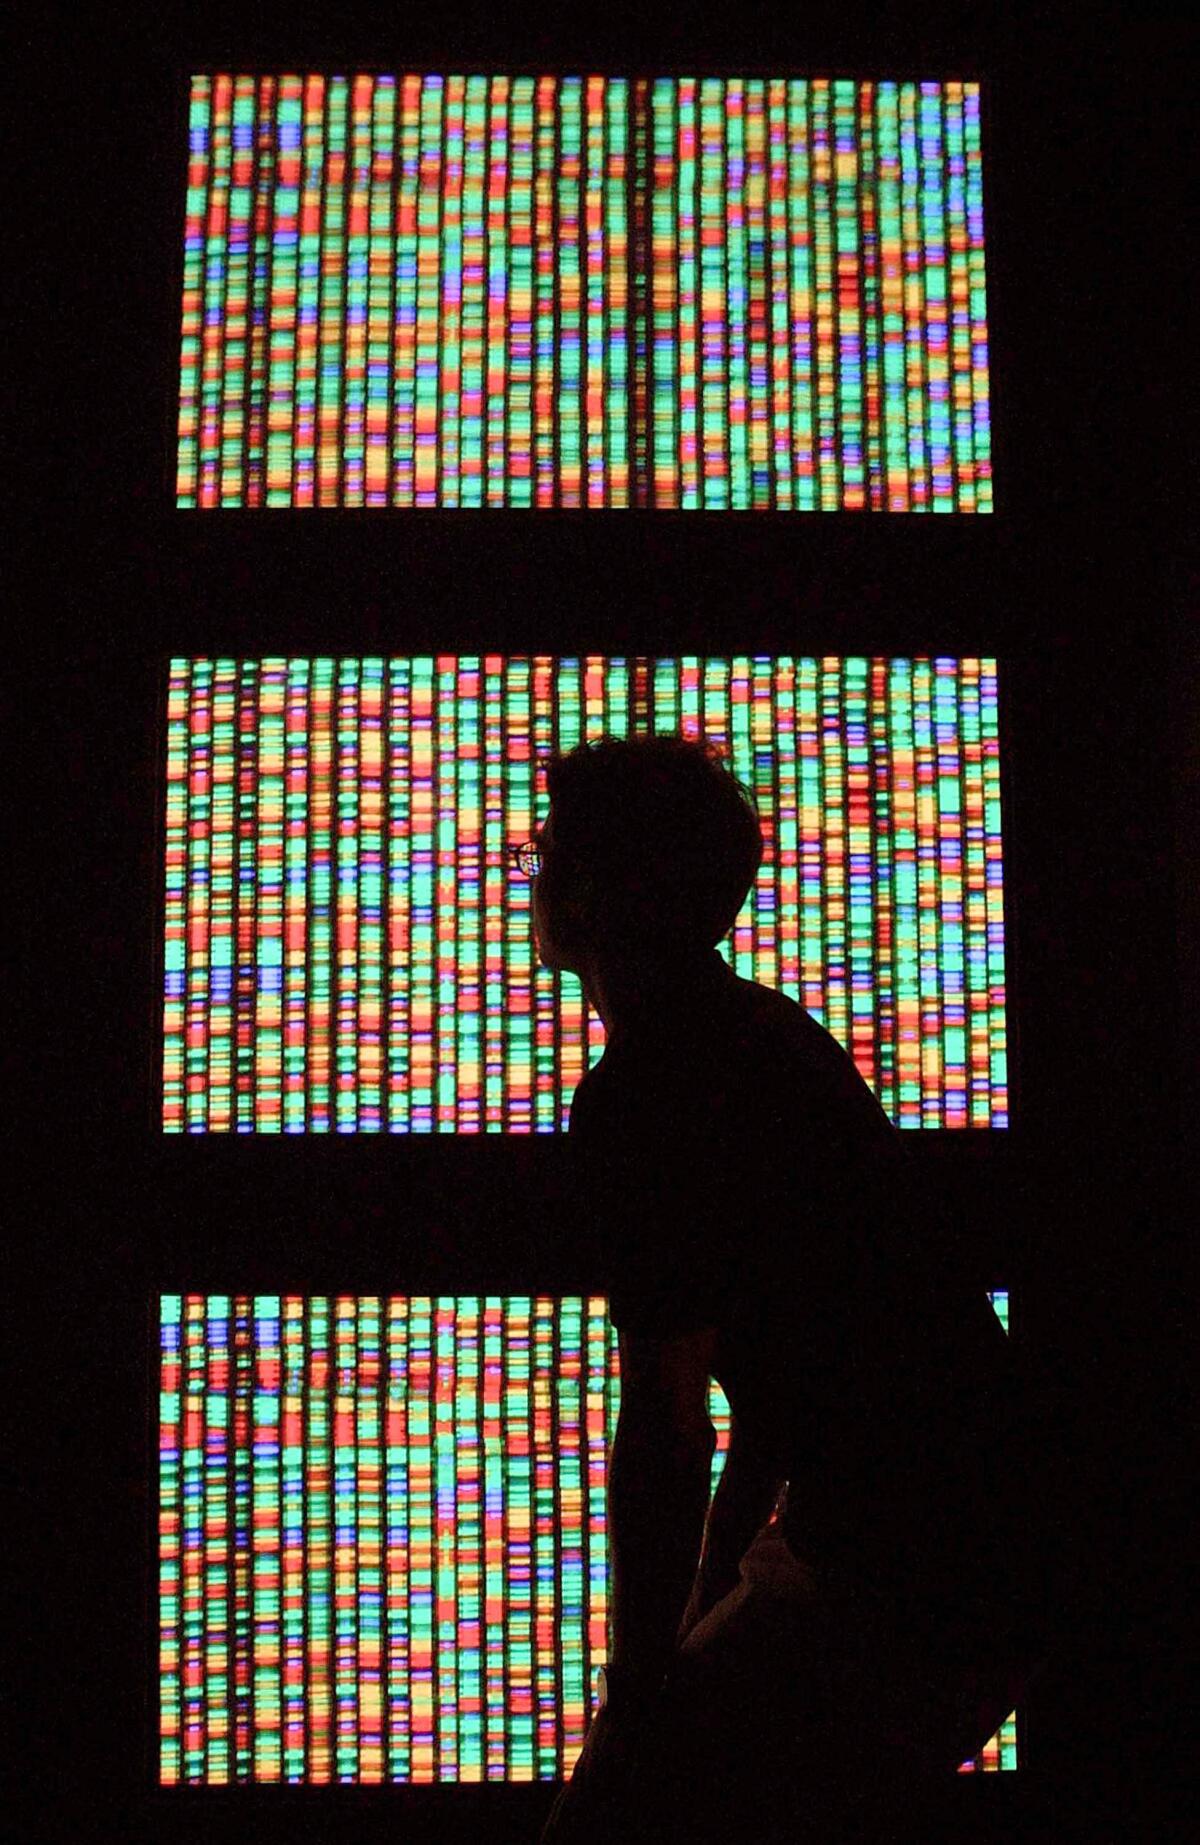 A visitor views a digital representation of the human genome at the American Museum of Natural History in New York City.